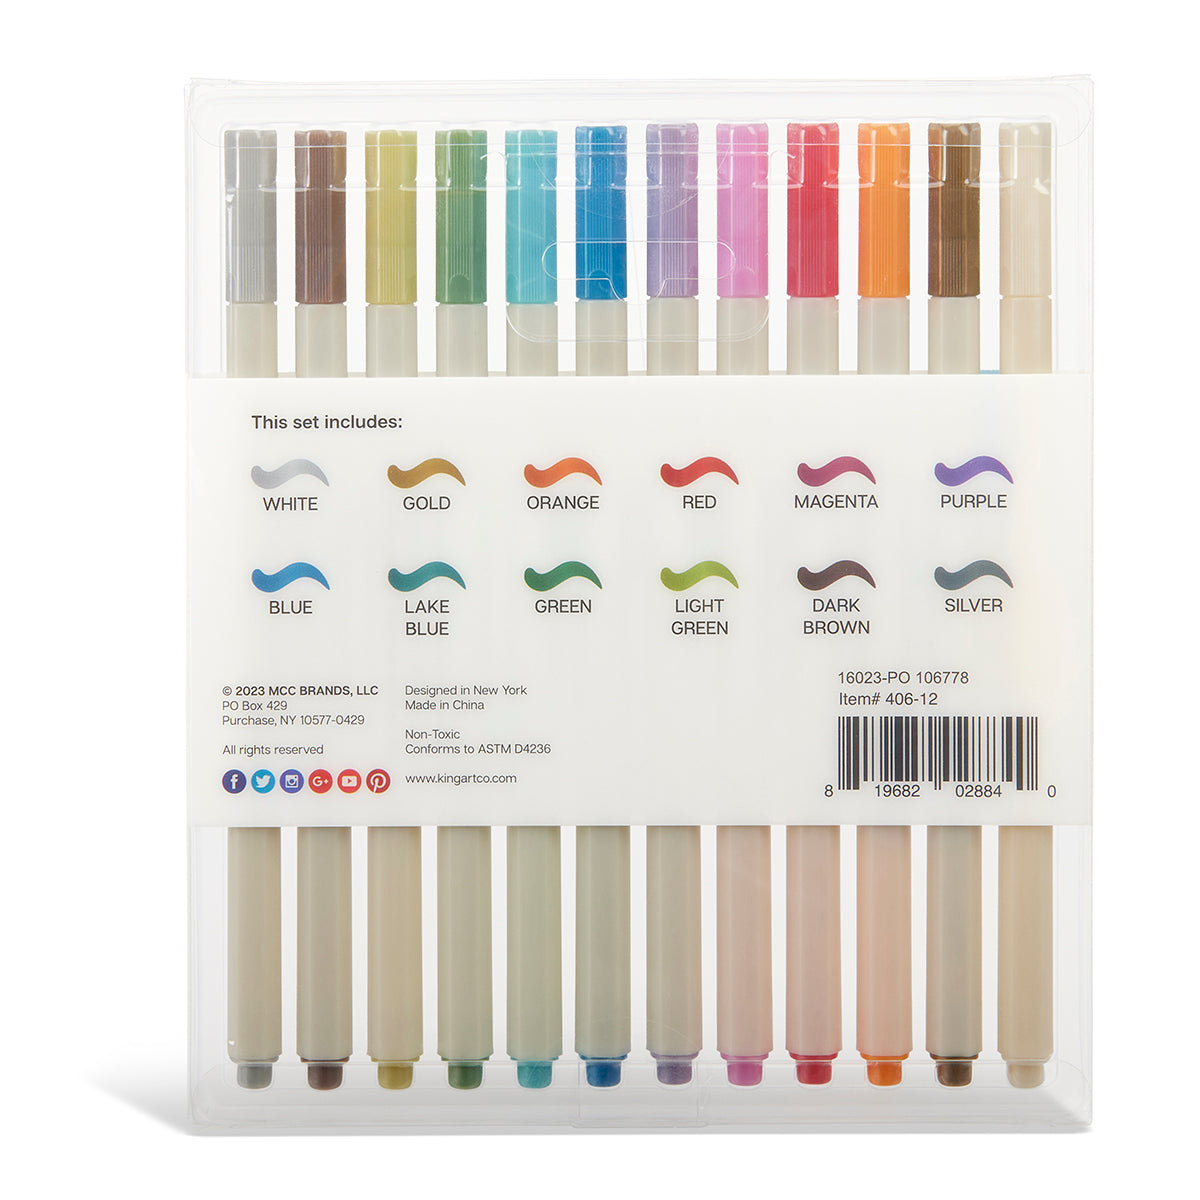 Clearance-10-Colors-Ink-Metallic-Marker-Pen-Scrapbook-DIY-Card-Making-Stationery